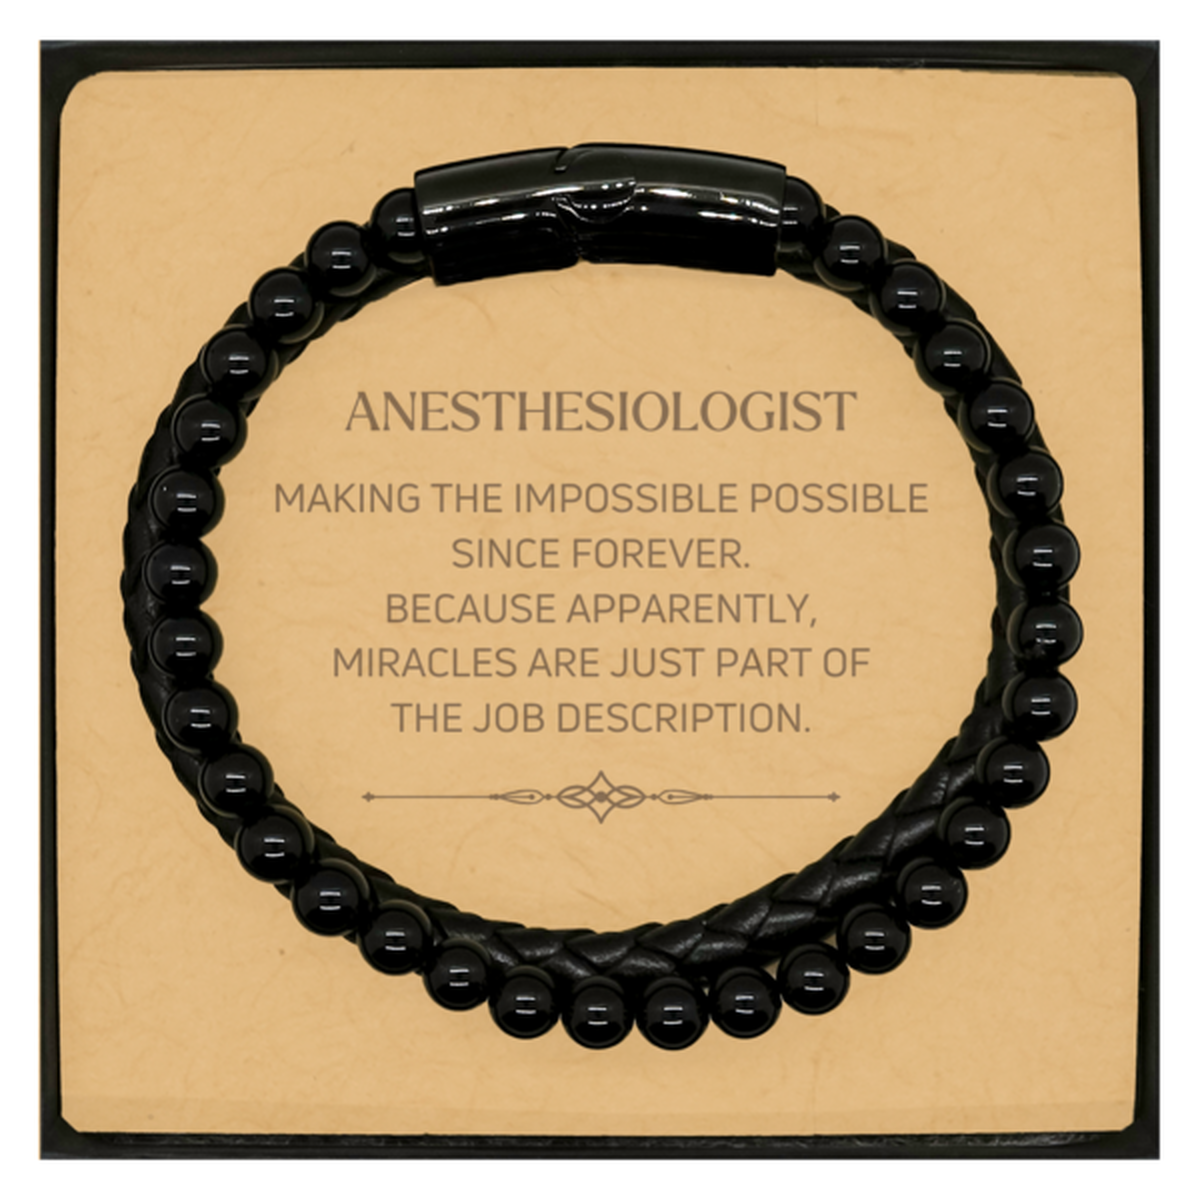 Funny Anesthesiologist Gifts, Miracles are just part of the job description, Inspirational Birthday Christmas Stone Leather Bracelets For Anesthesiologist, Men, Women, Coworkers, Friends, Boss